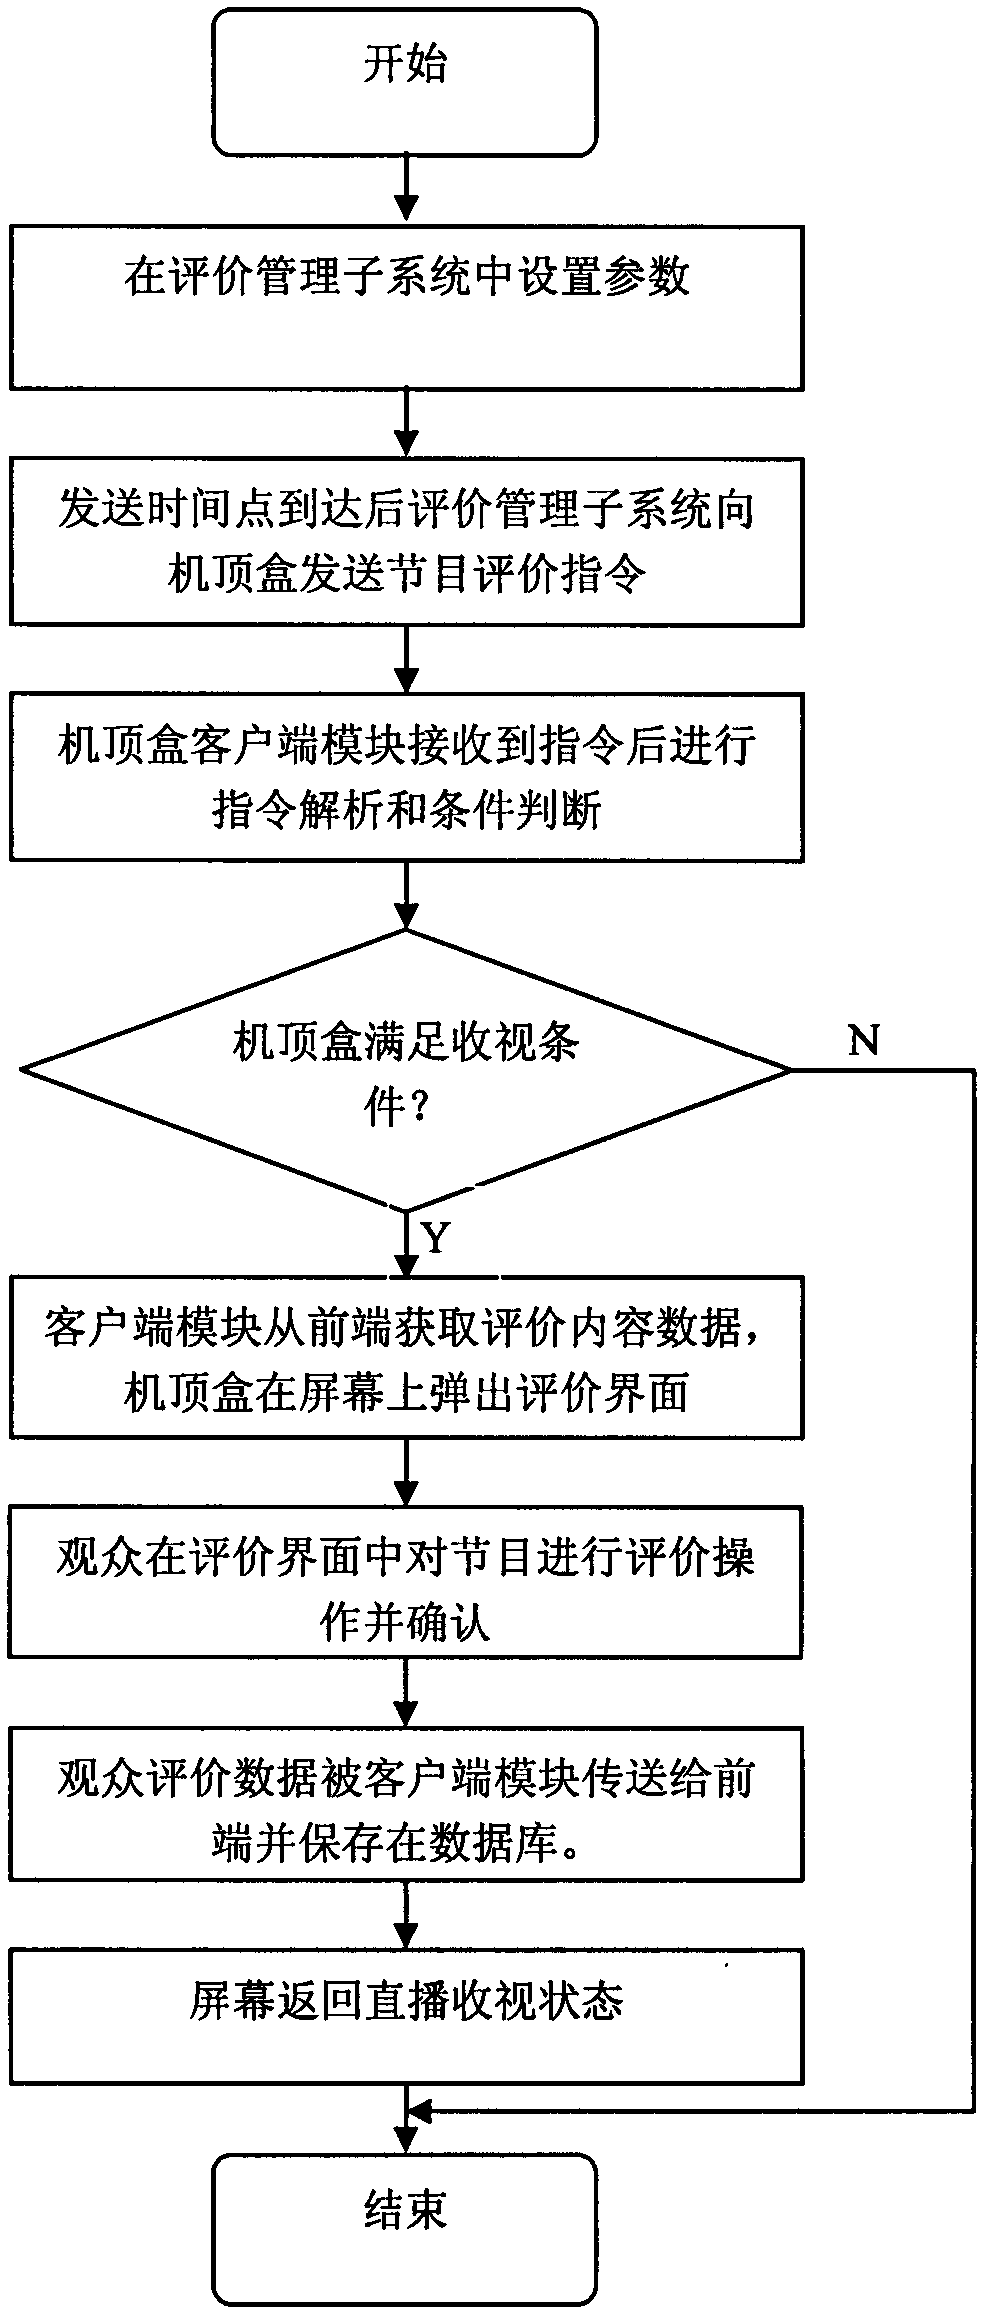 Method and system for audience evaluation investigation of TV programs